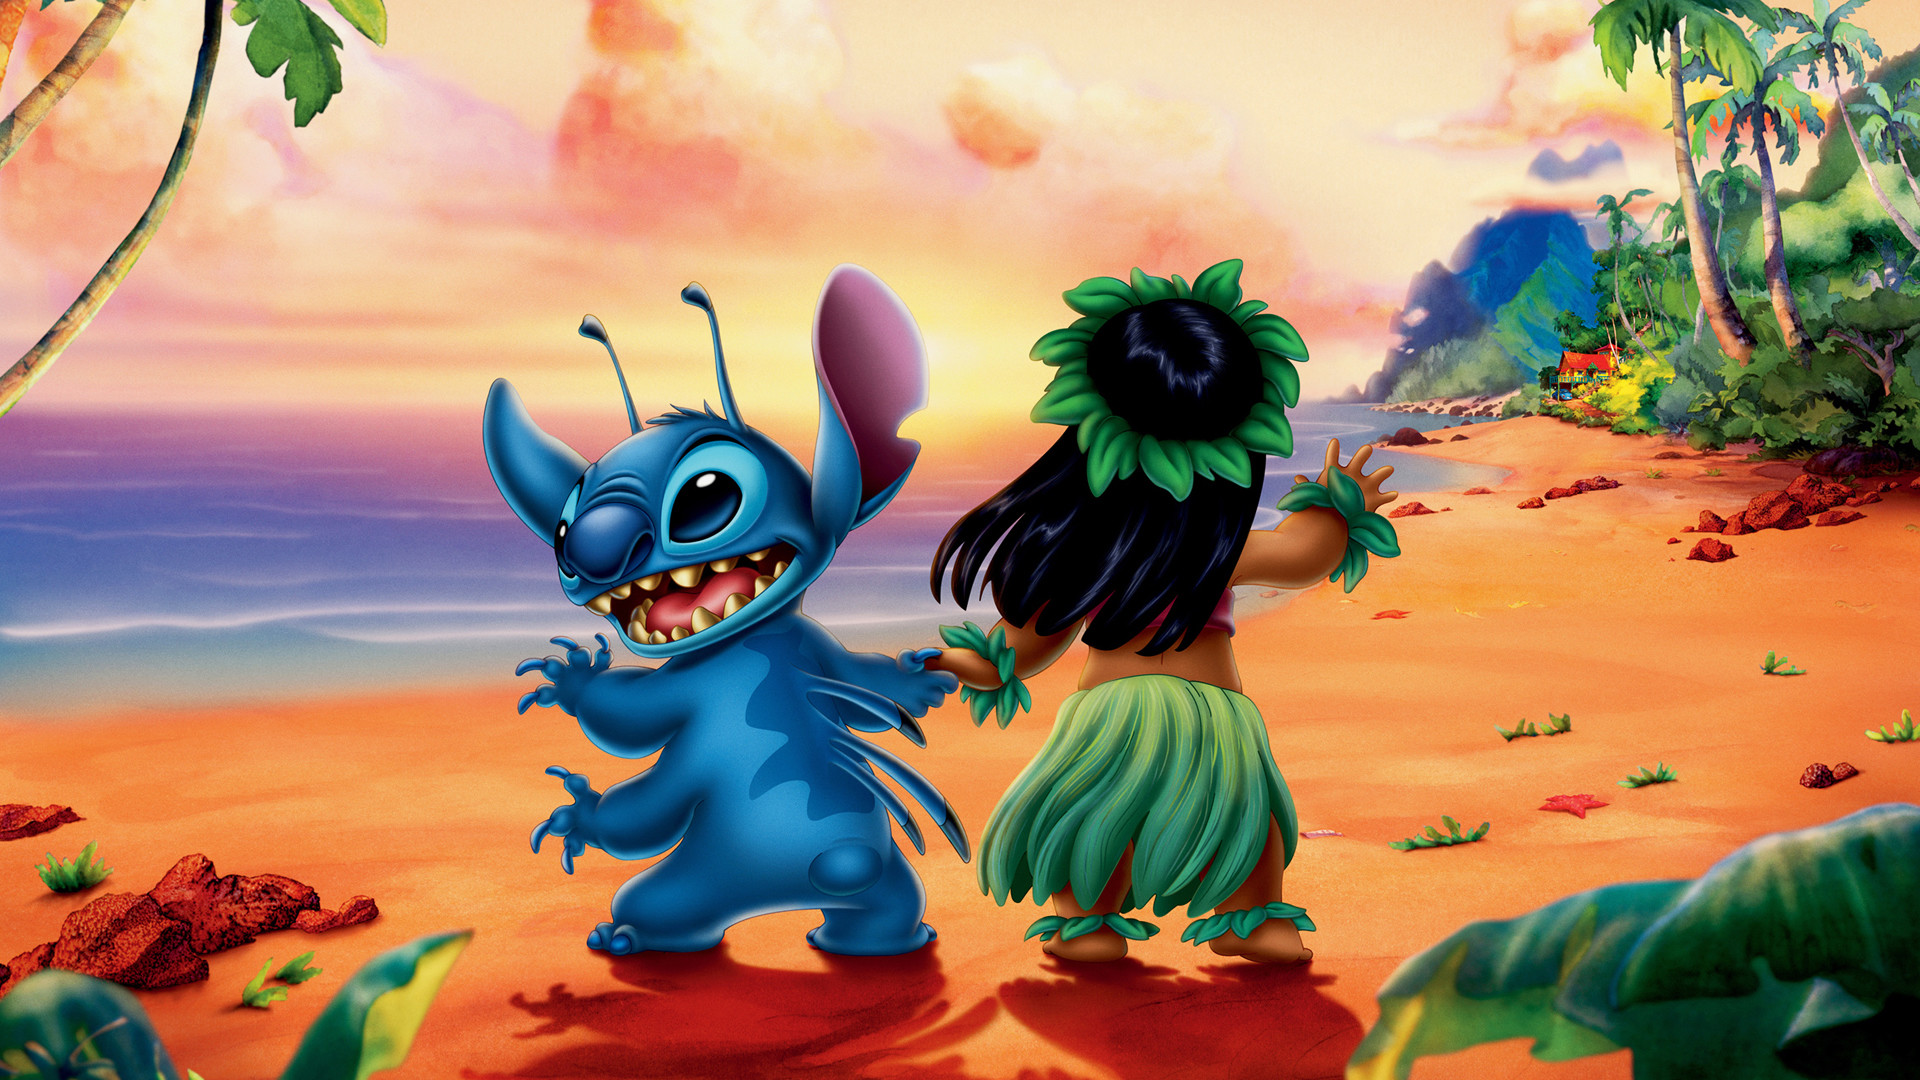 Cute Lilo and Stitch Wallpaper (60+ images)